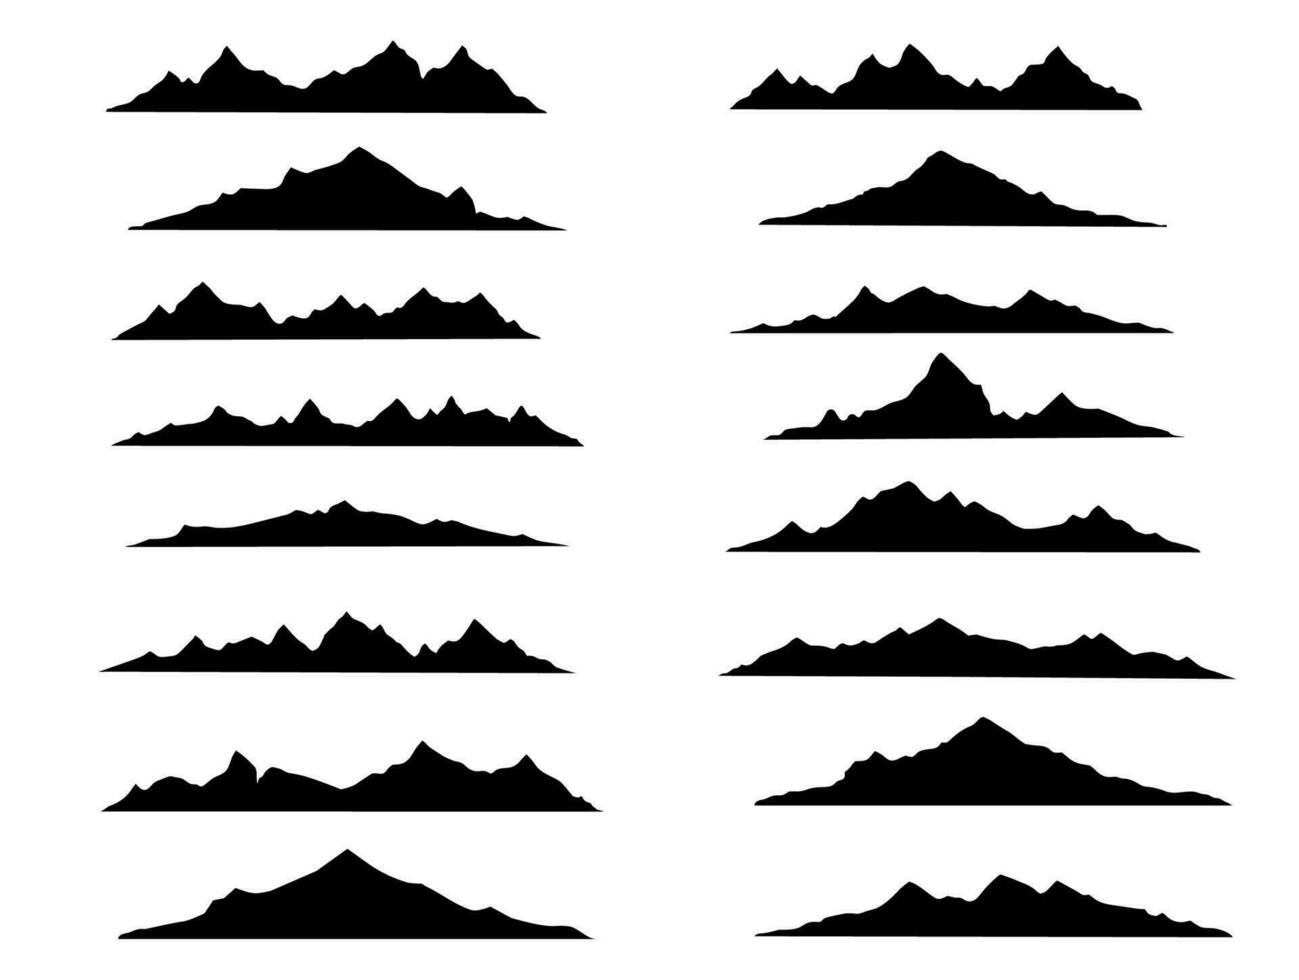 Black hill, rock and mountain silhouettes set vector